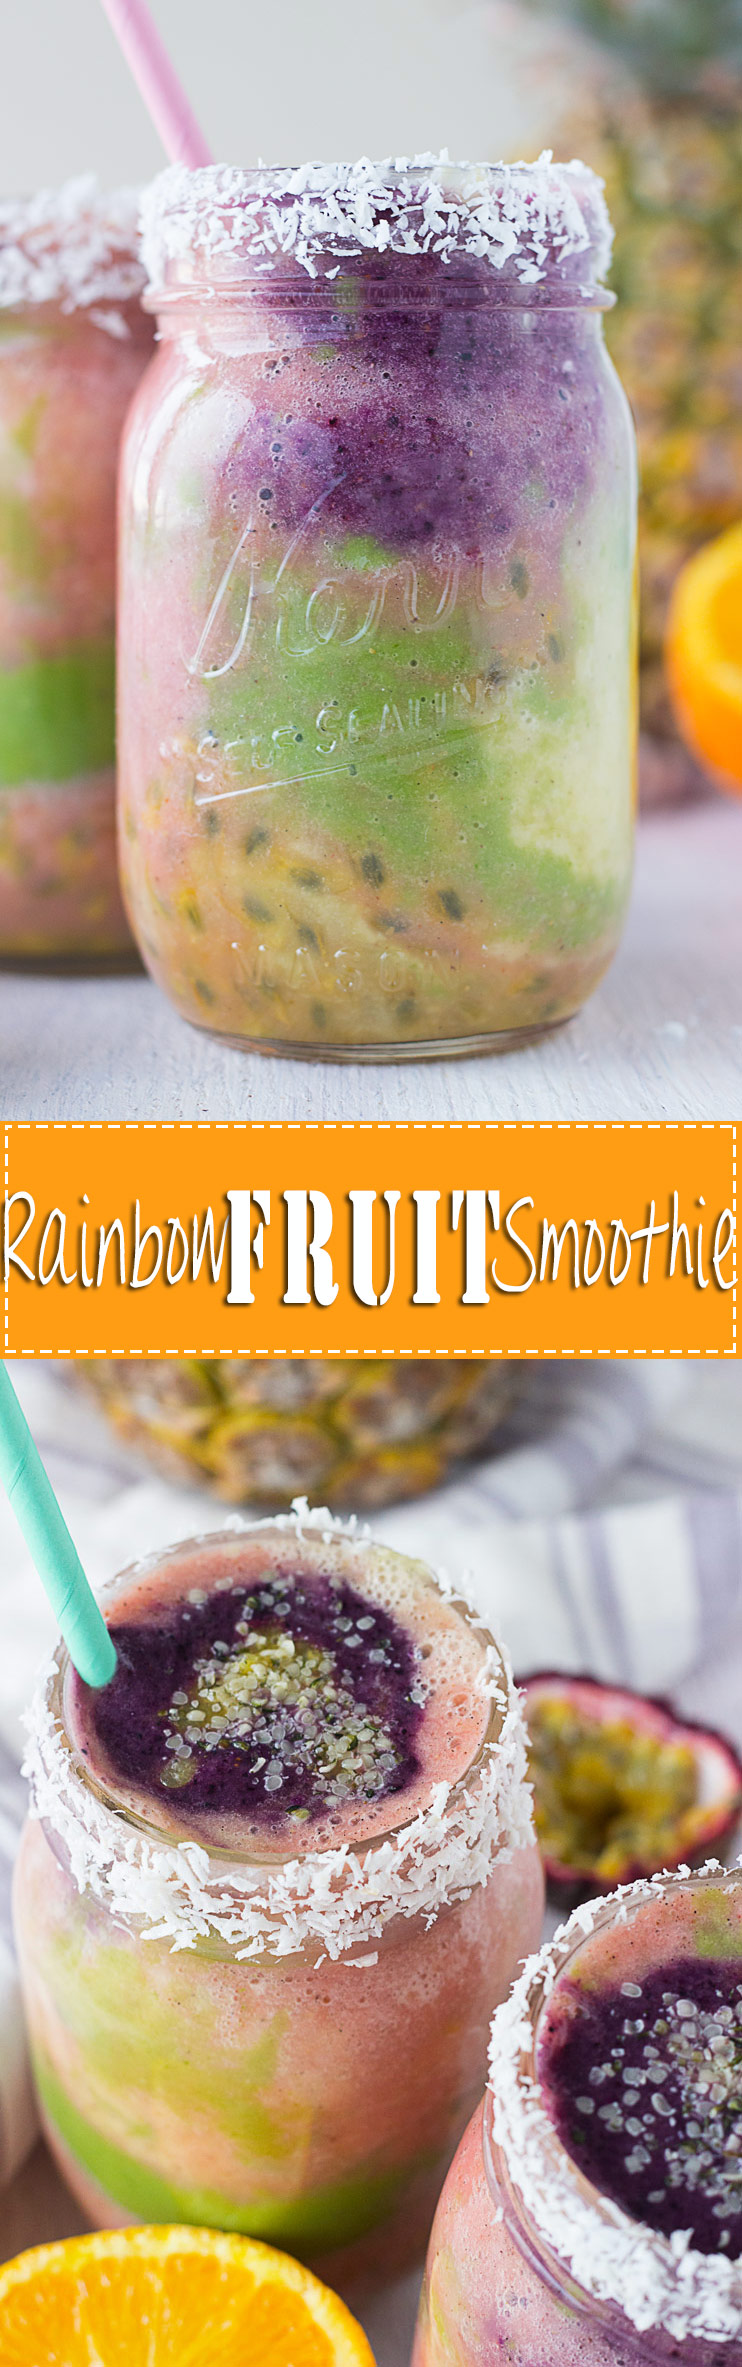 Rainbow Fruit Smoothie - the most beautiful and delicious smoothie ever! from www.sprinkleofgreen.com 